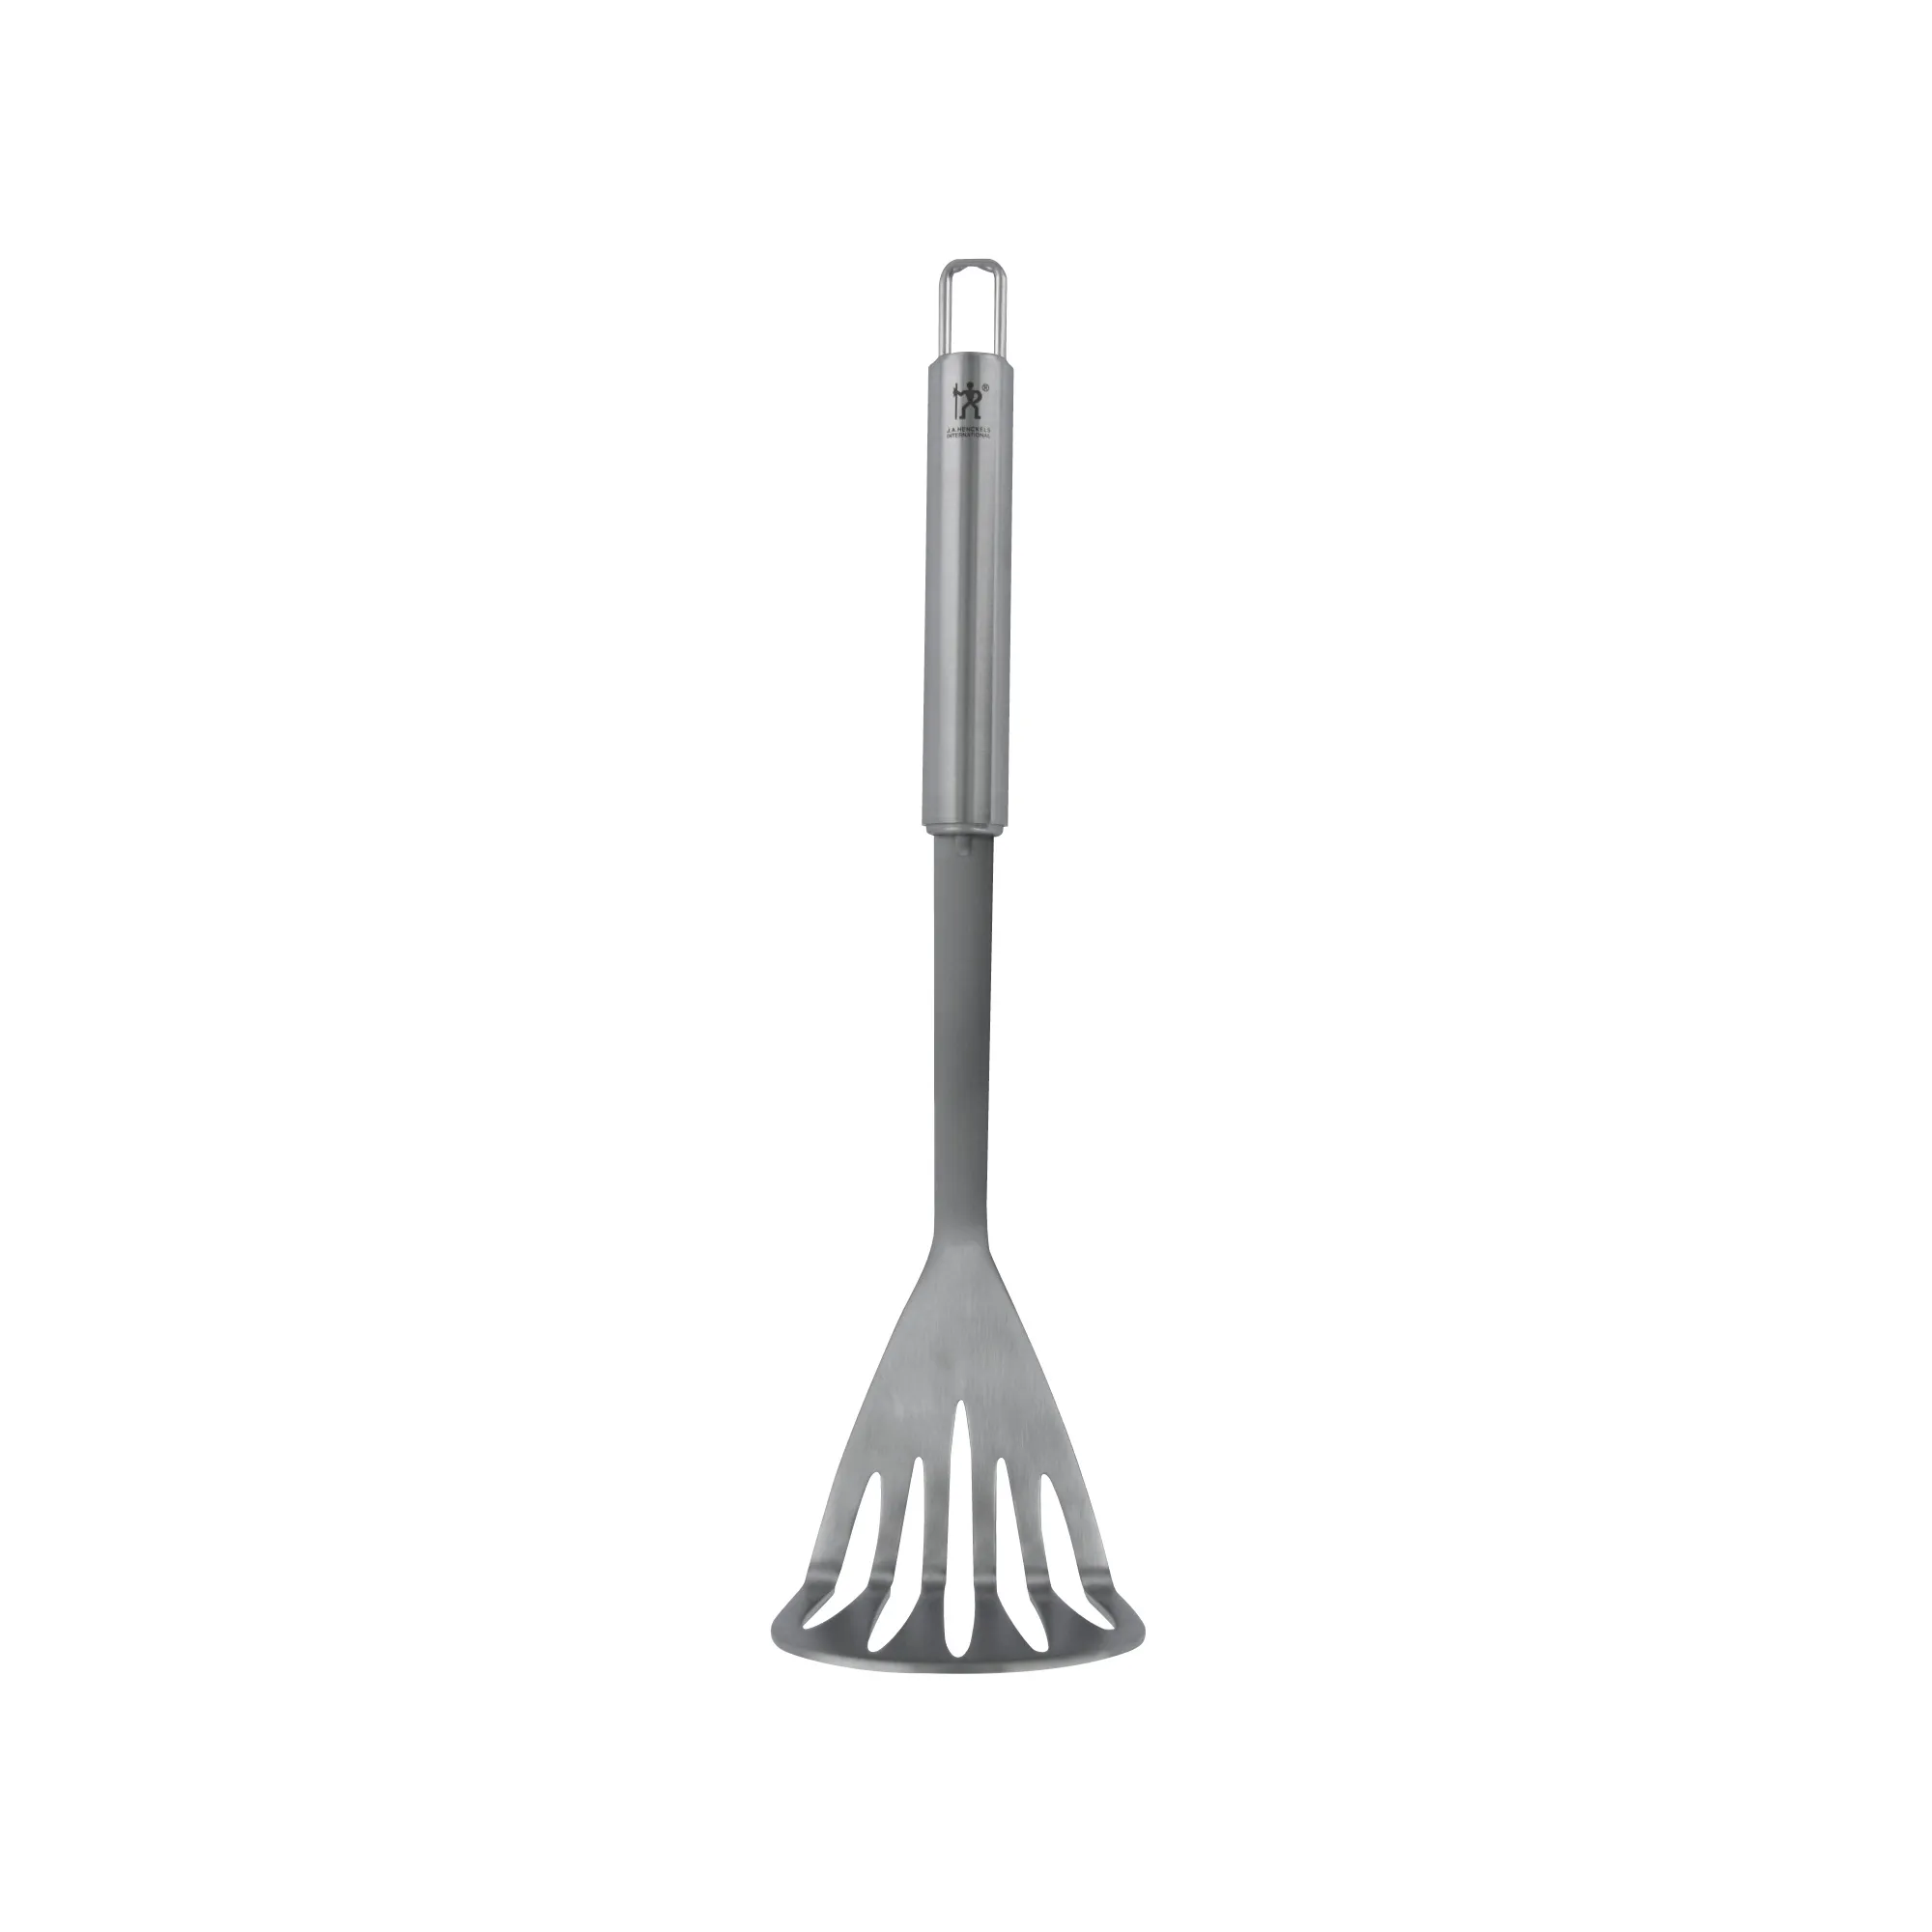 Henckels Cooking Tools Whisk - Large